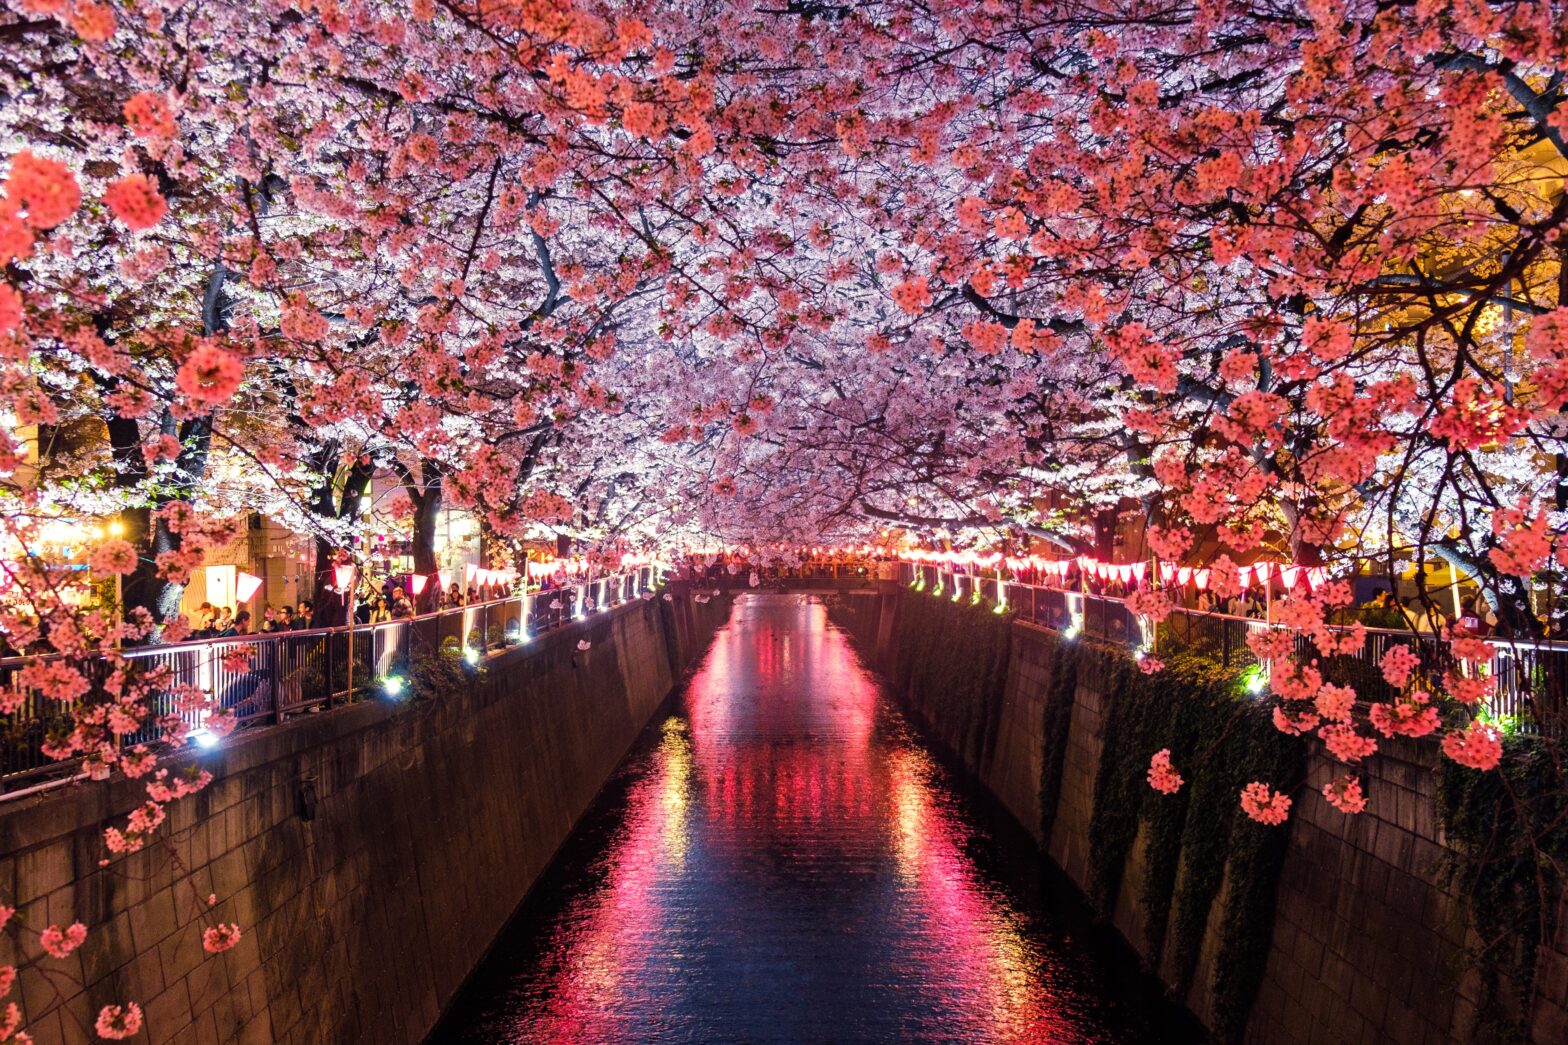 The Best Time To Celebrate Cherry Blossom Season in Japan